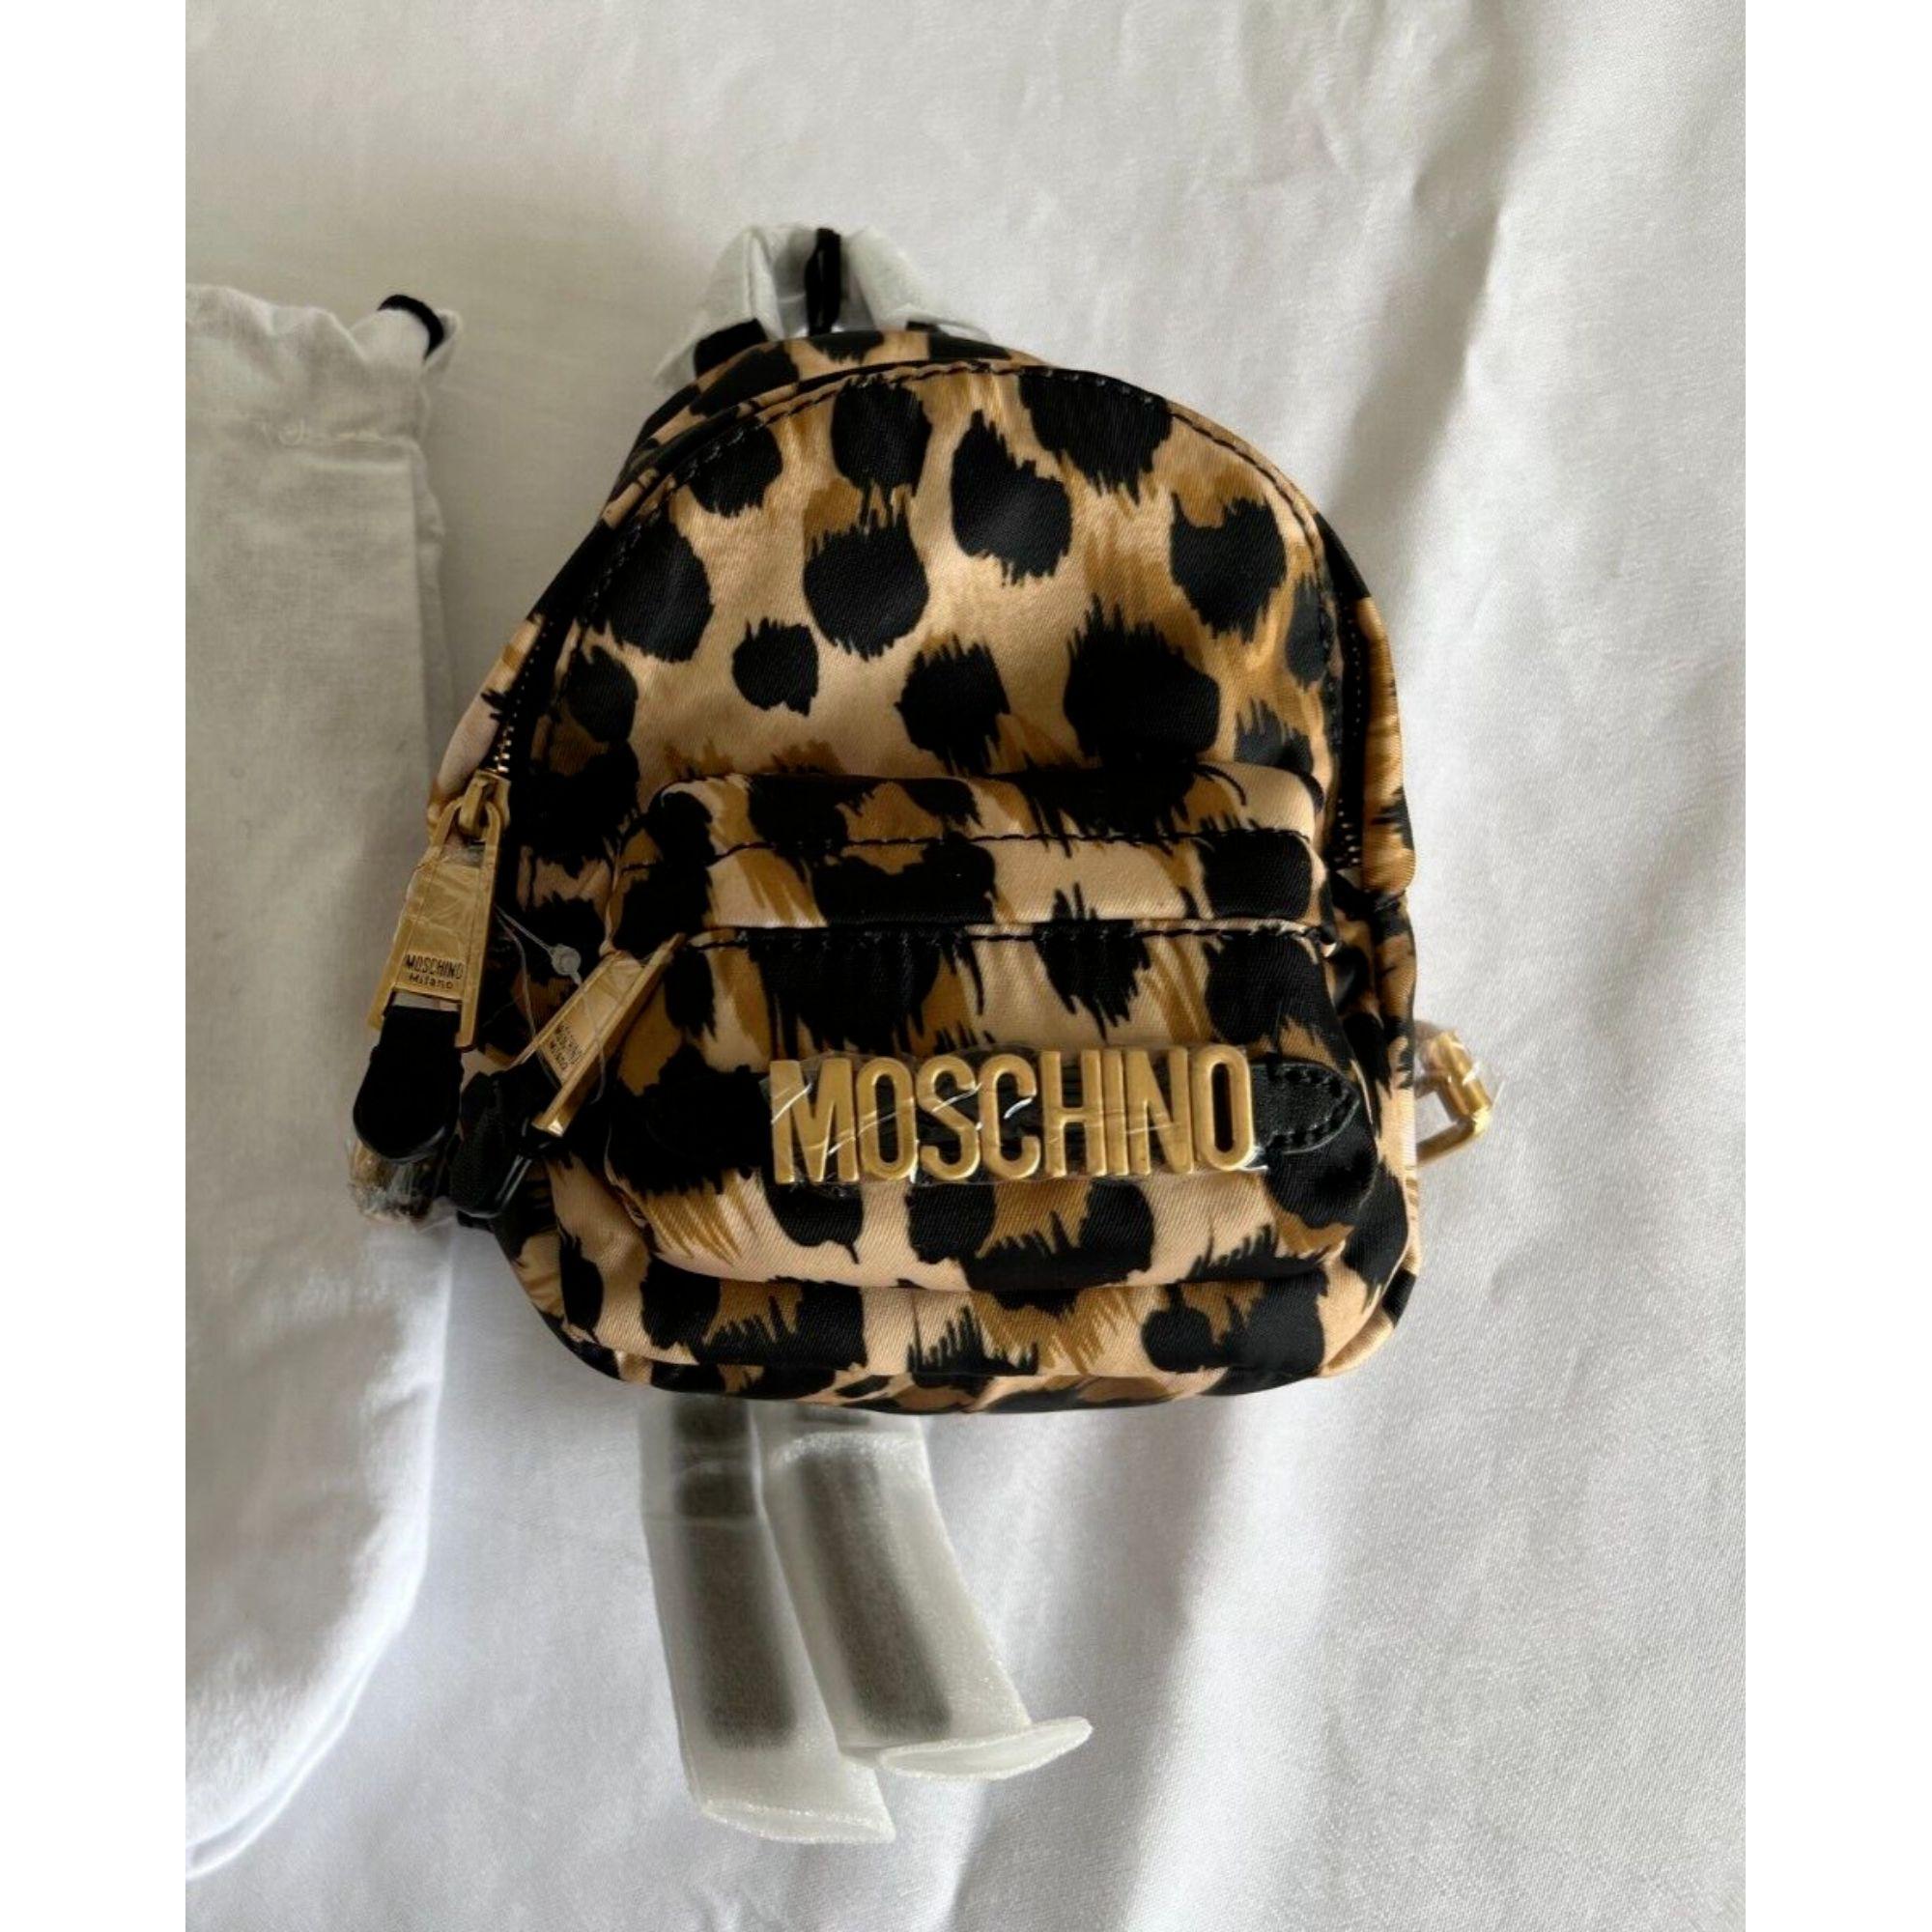 AW21 Moschino Couture Leopard Print Shoulder Bag Mini Backpack by Jeremy Scott For Sale 1